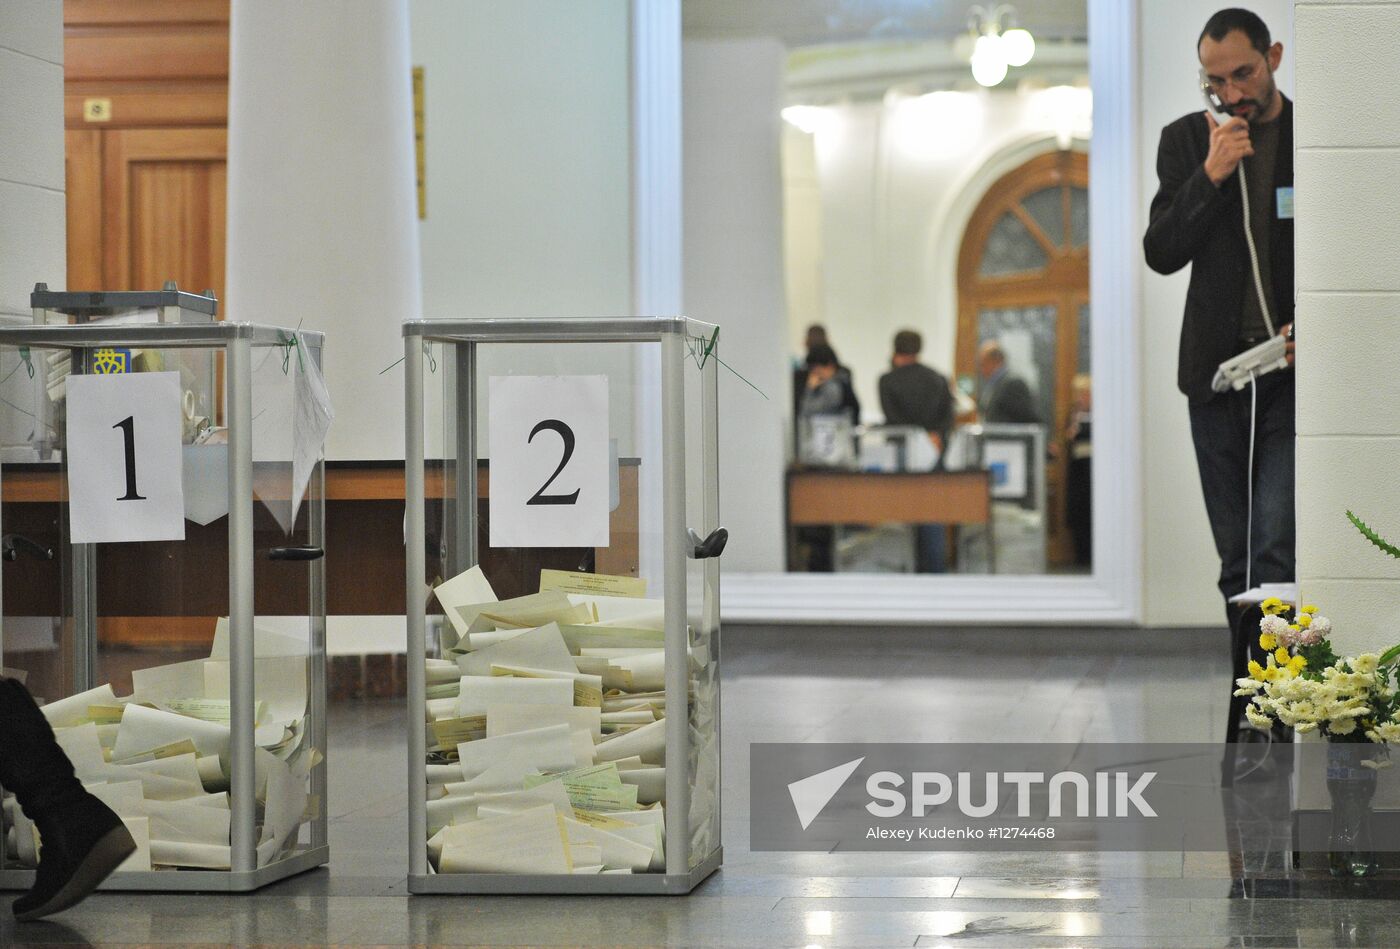 Counting votes in parliamentary elections in Ukraine